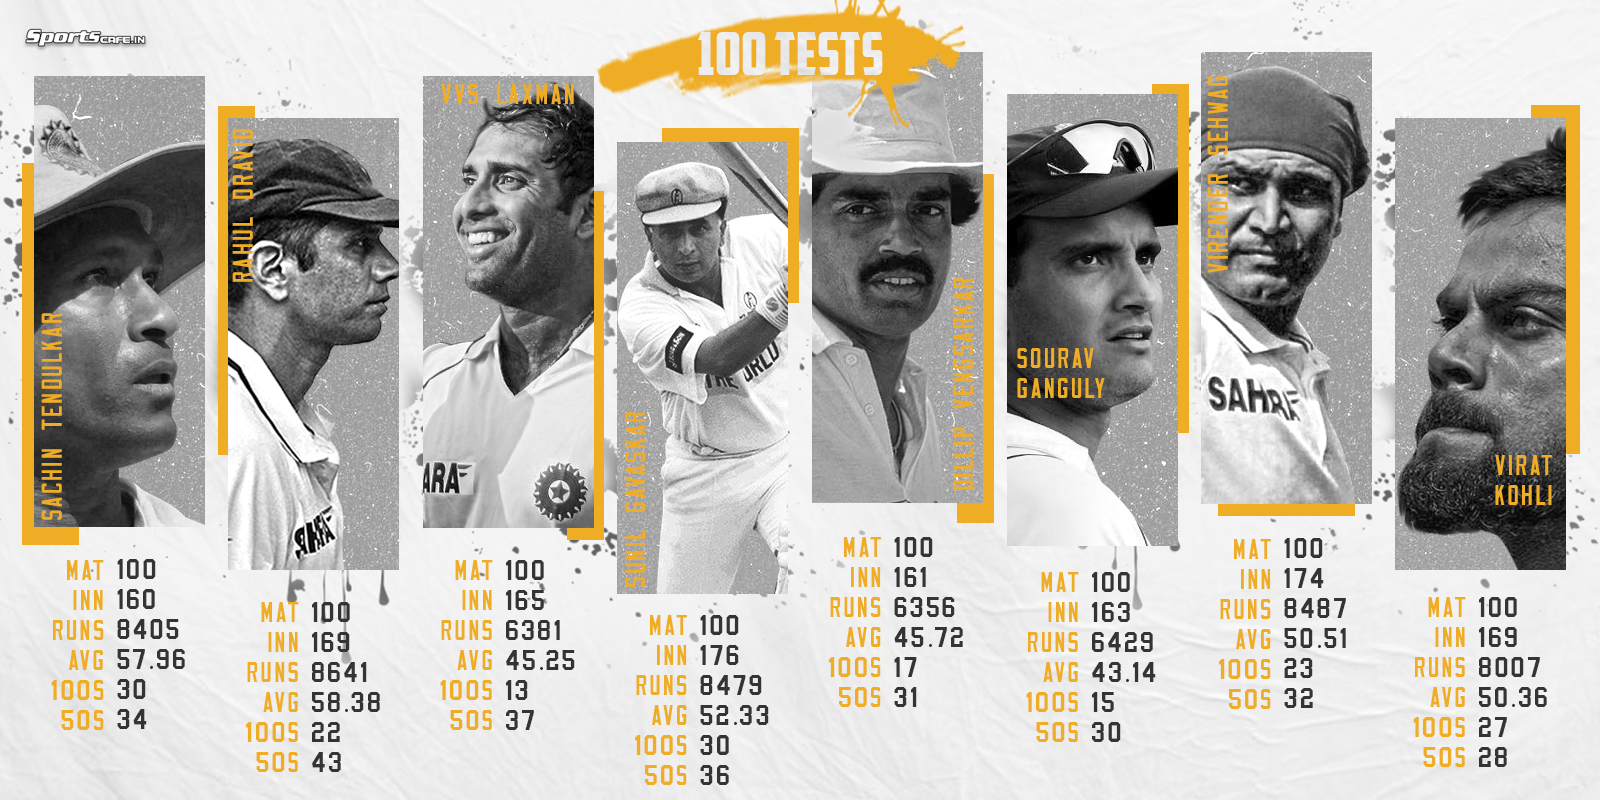 Where Virat Kohli stands with other Indian cricketers after 100 Tests- a statistical analysis 